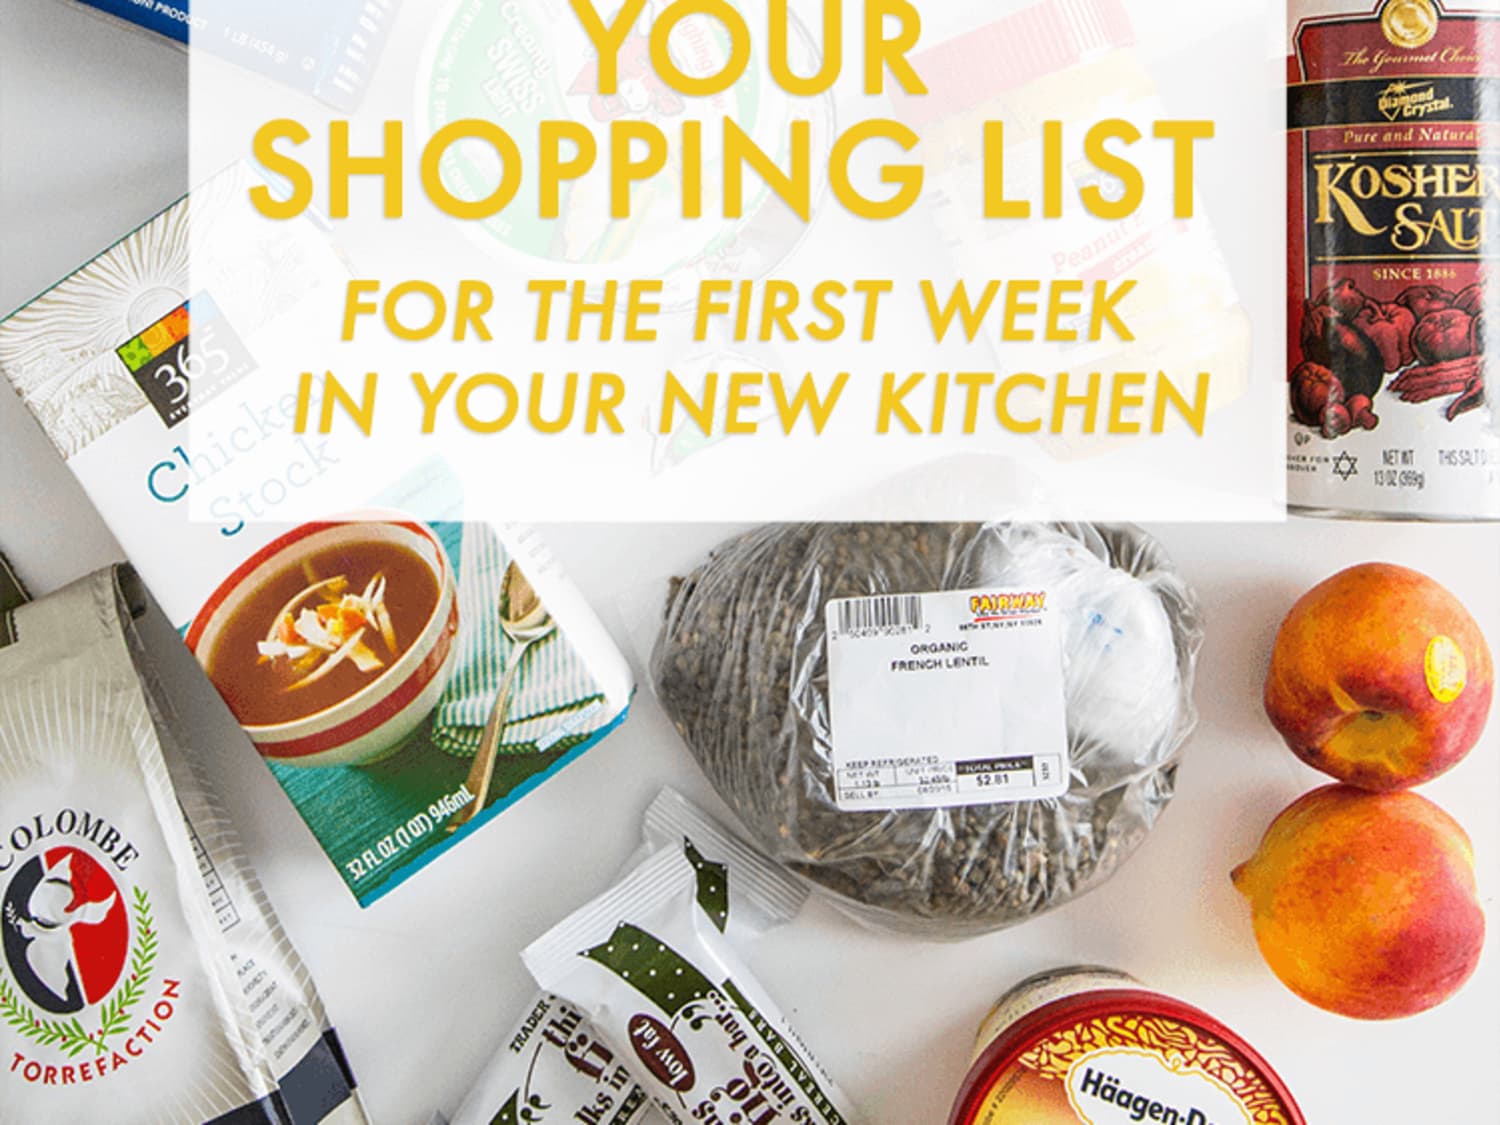 Once-a-Month Grocery Shopping: The 4-Tier, Stock-Up Plan for